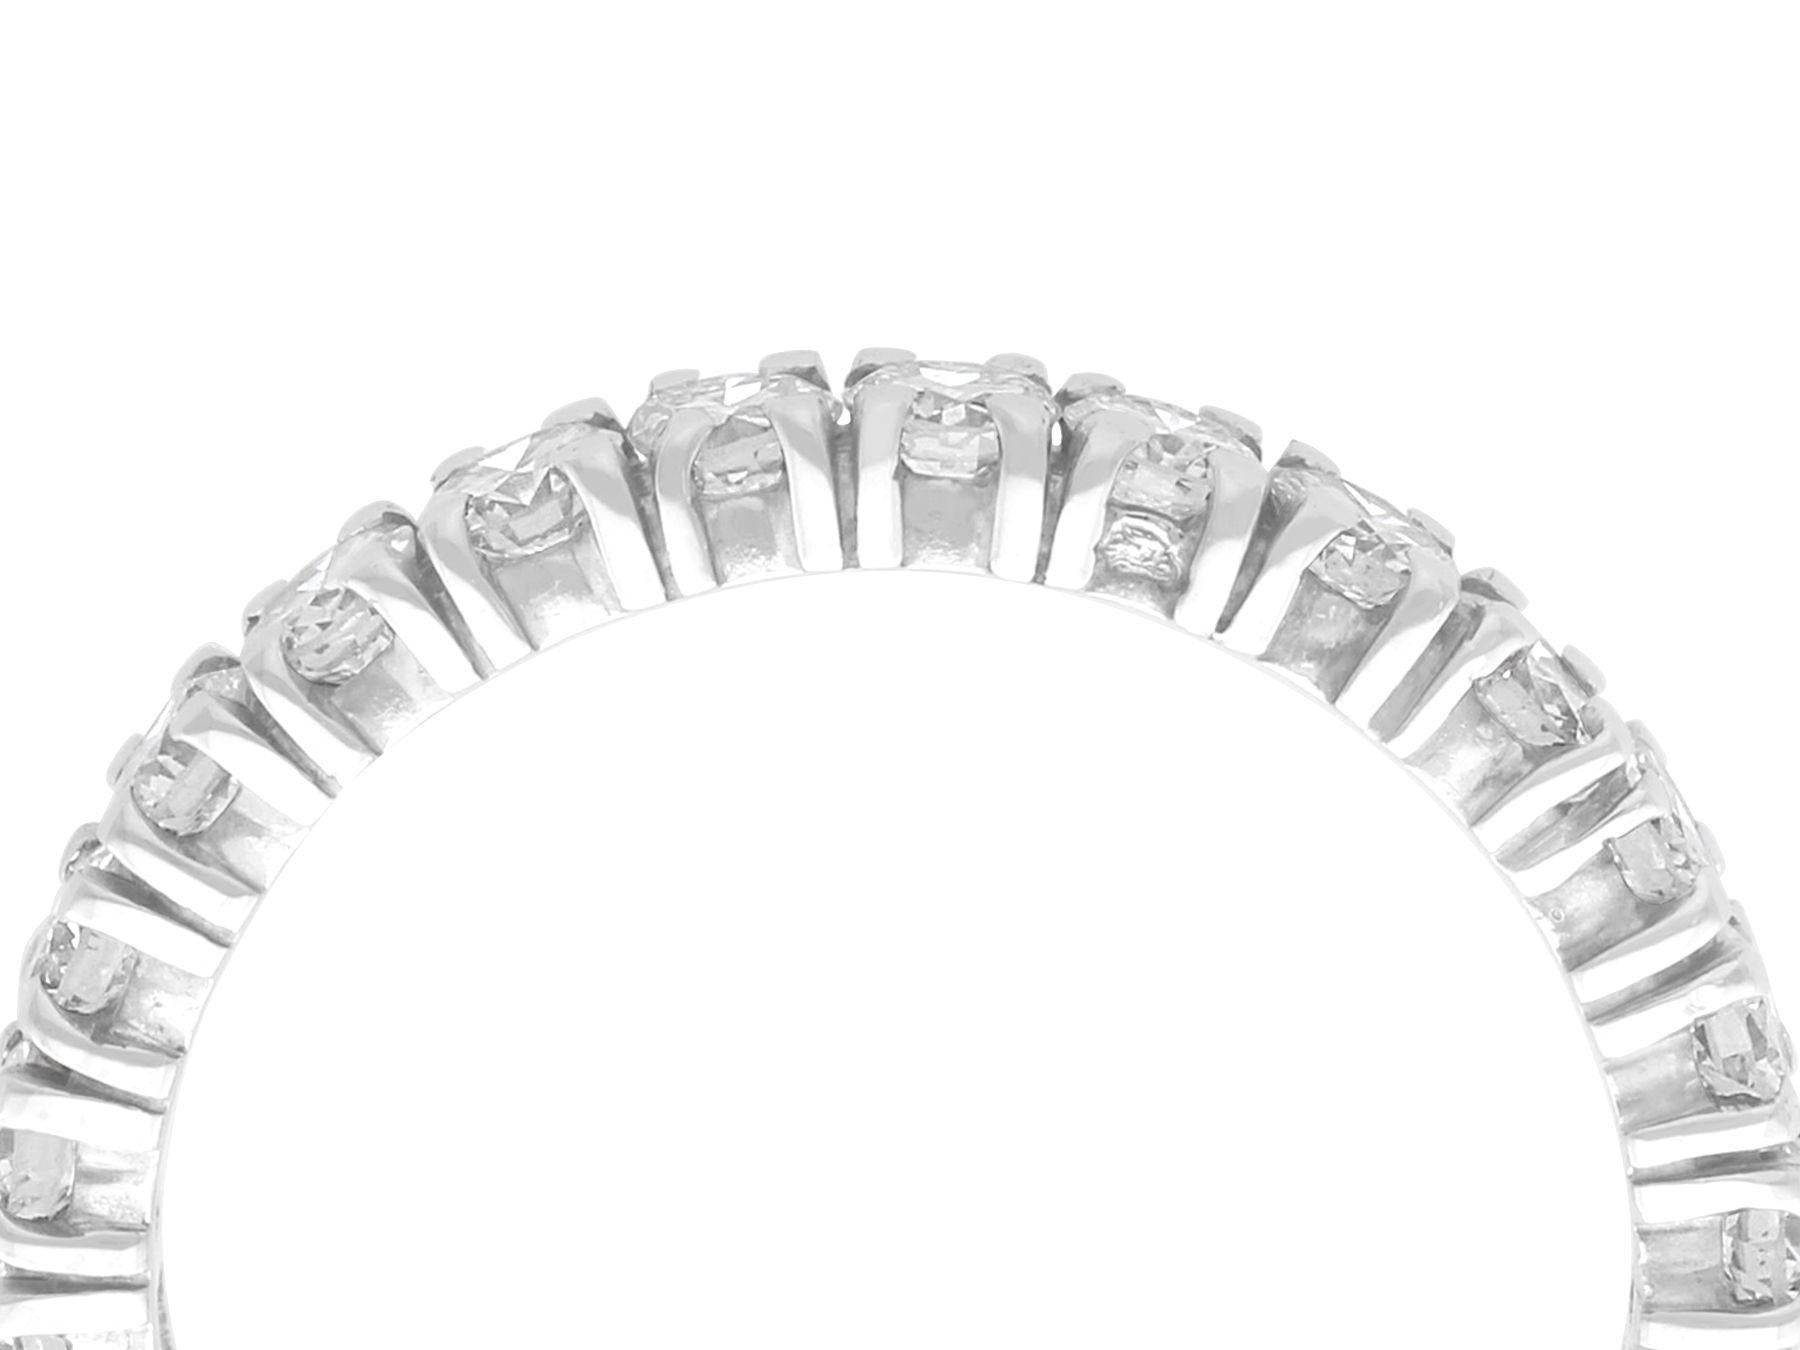 A stunning, fine and impressive vintage French 3 carat diamond and 18 karat white gold full eternity ring; part of our diverse diamond jewelry and estate jewelry collections

This stunning, fine and impressive diamond eternity band has been crafted